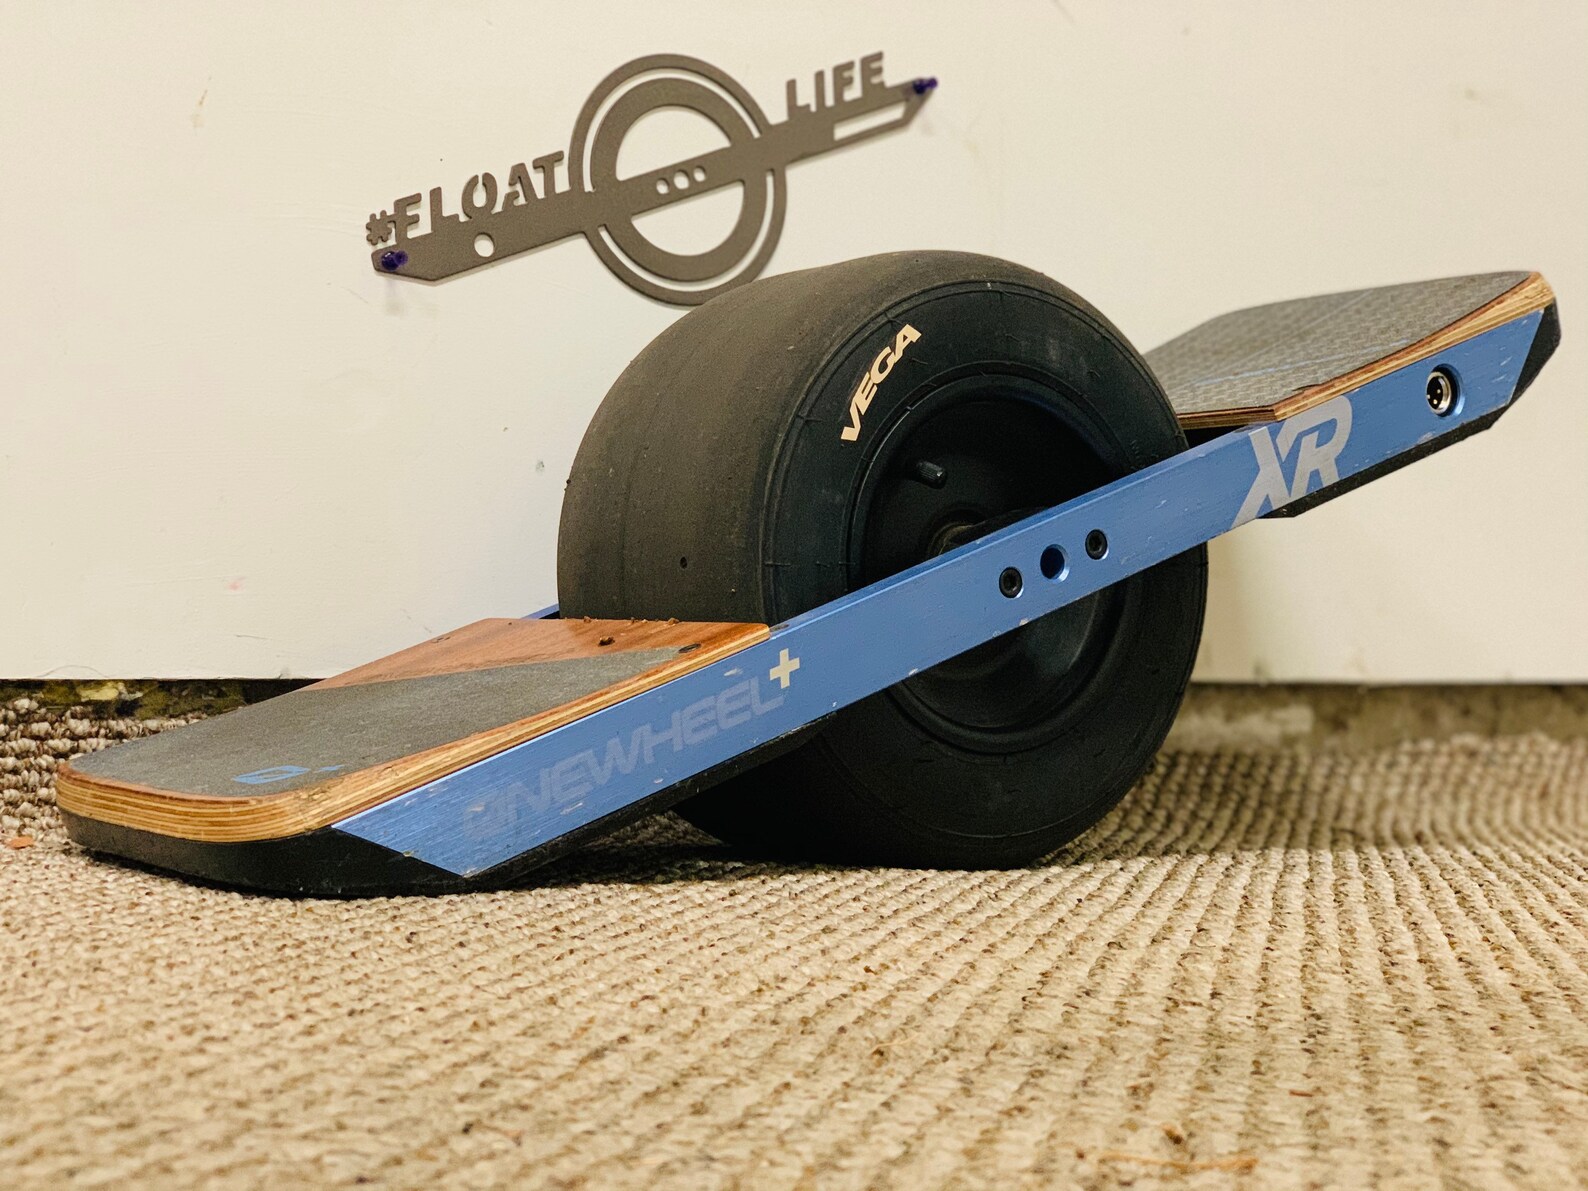 Onewheel Wall Art floatlife. Must Have for Your One Wheel. - Etsy